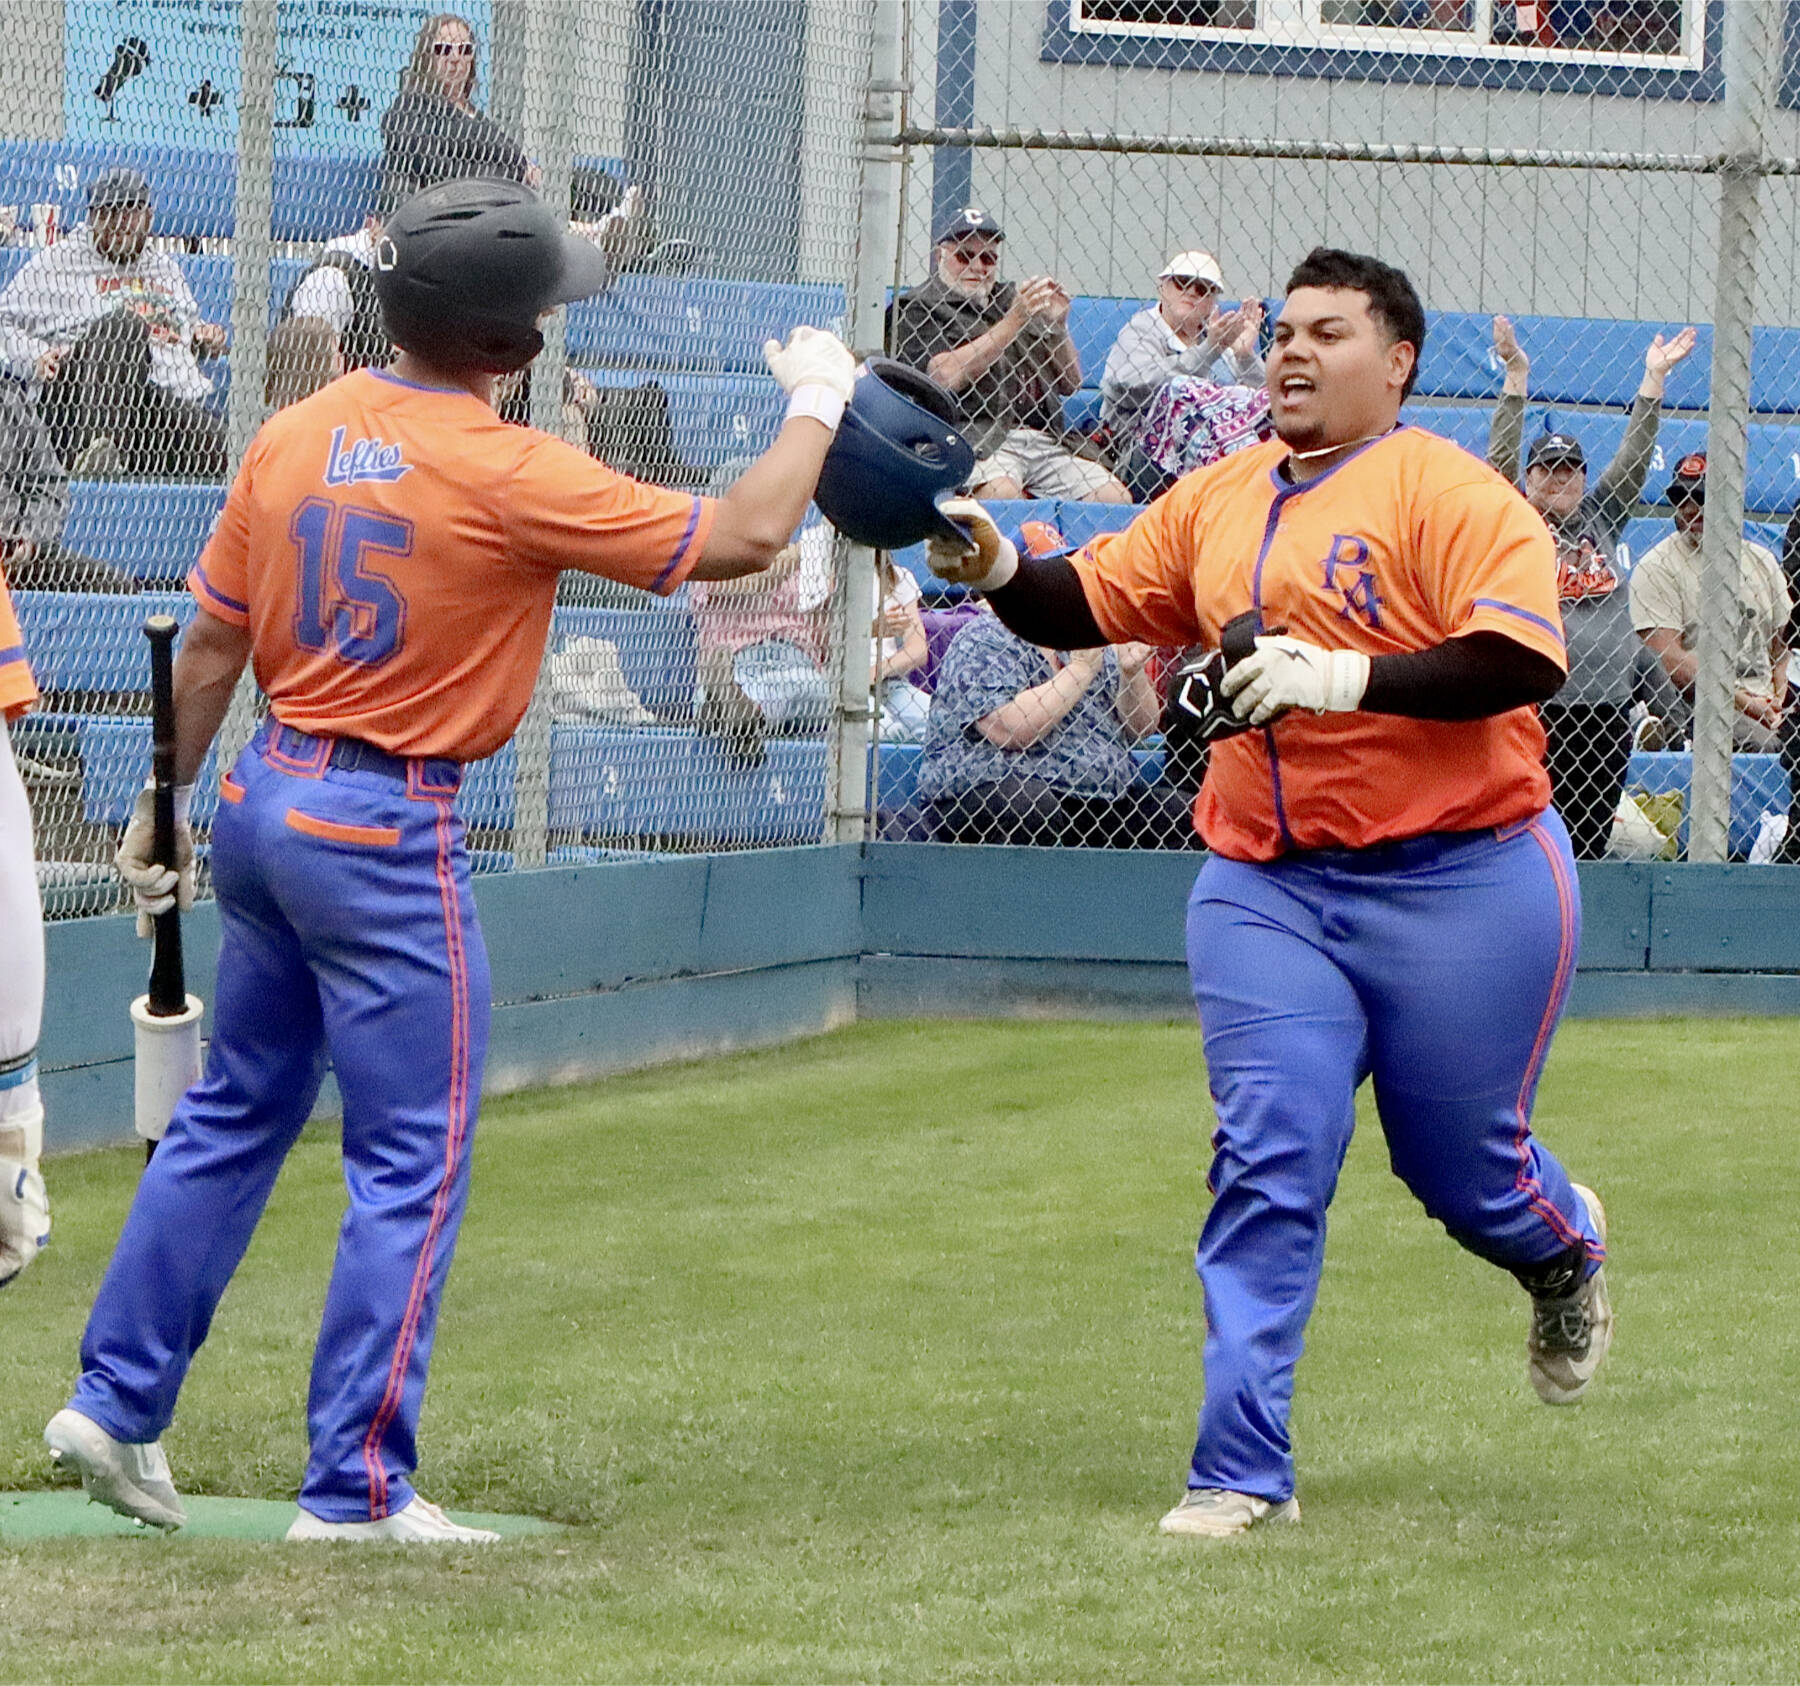 Spencer Dickinson of Saipan is greeted at home plate at Civic Field on Sunday by teammate Zach Blair after hitting a home run for the Port Angeles Lefties. (Dave Logan/for Peninsula Daily News)